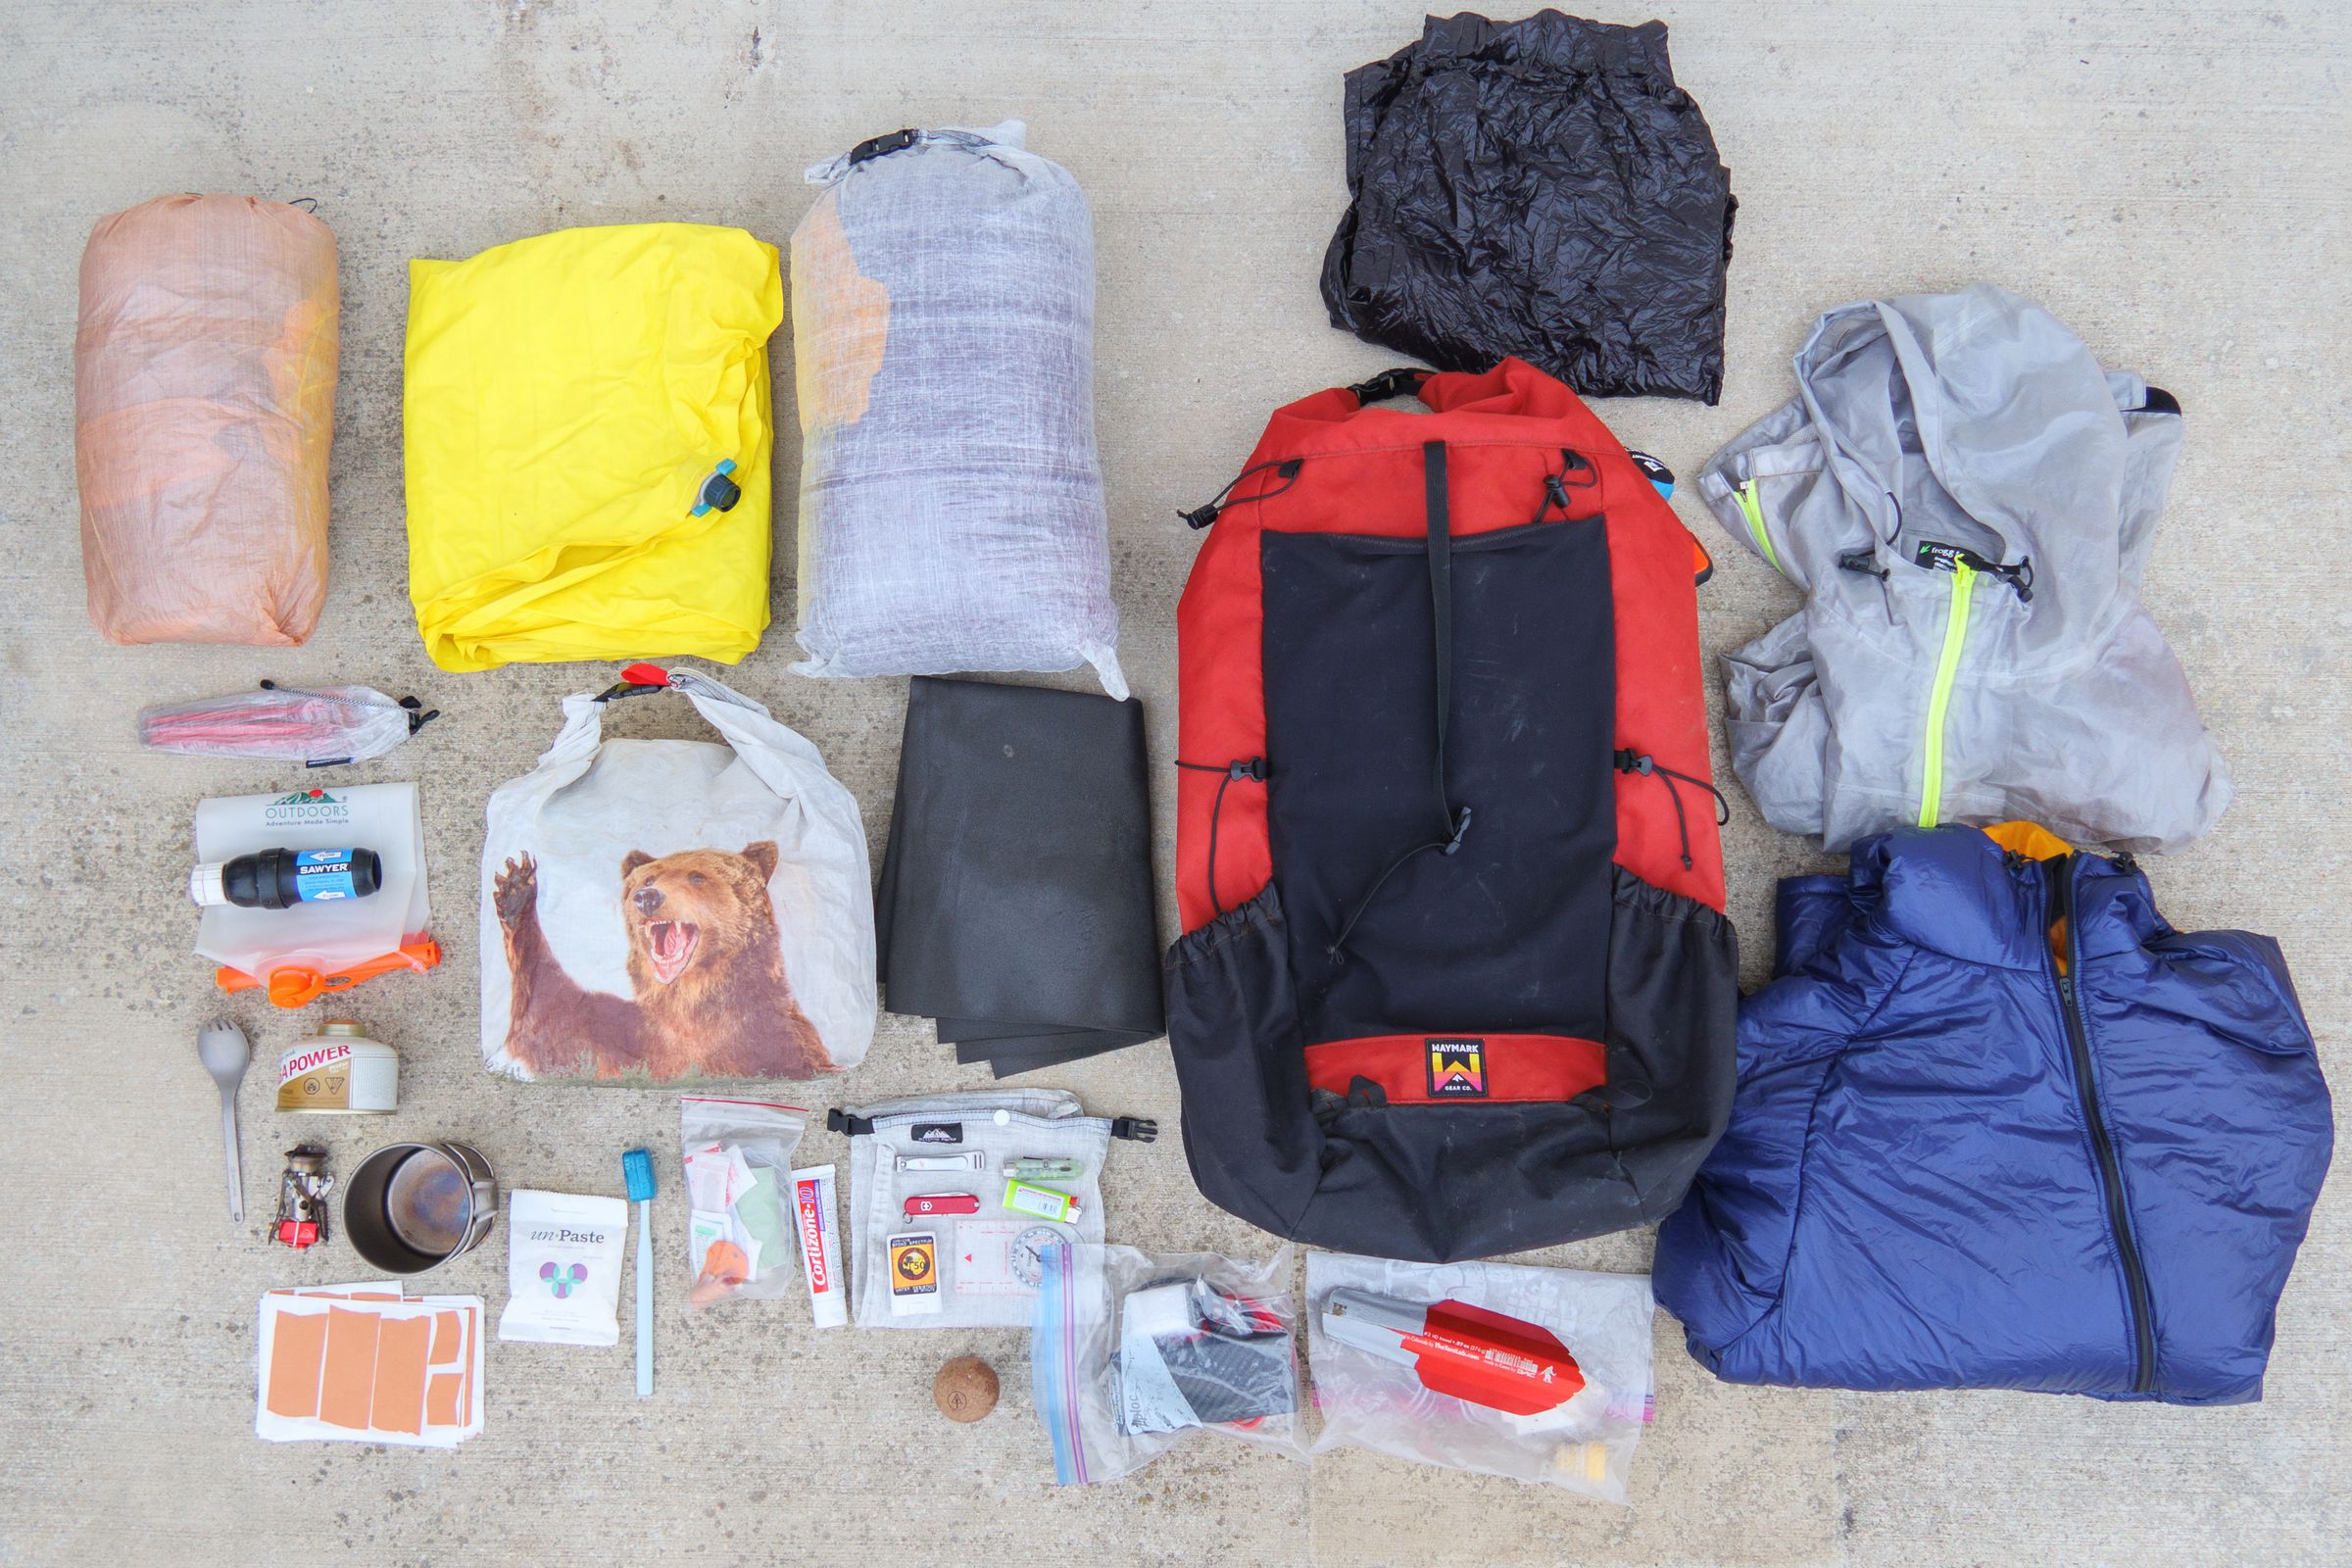 Photo of backpacking gear. From top left to bottom right: A tent, sleeping pad, quilt, wind pants, rain jacket, tent stakes, a water bag and filter, a food bag, a small foam mat, a backpack, a rain jacket, a spork, a gas canister, a mug, some leukotape strips, toothpaste tablets, a toothbrush, a first aid kit, lotion, a bag with nail clippers, a flashlight, swiss army knife, lighter, sunscreen, and compass on it, a cork ball, an electronics bag, a trowel, and a puffy jacket.